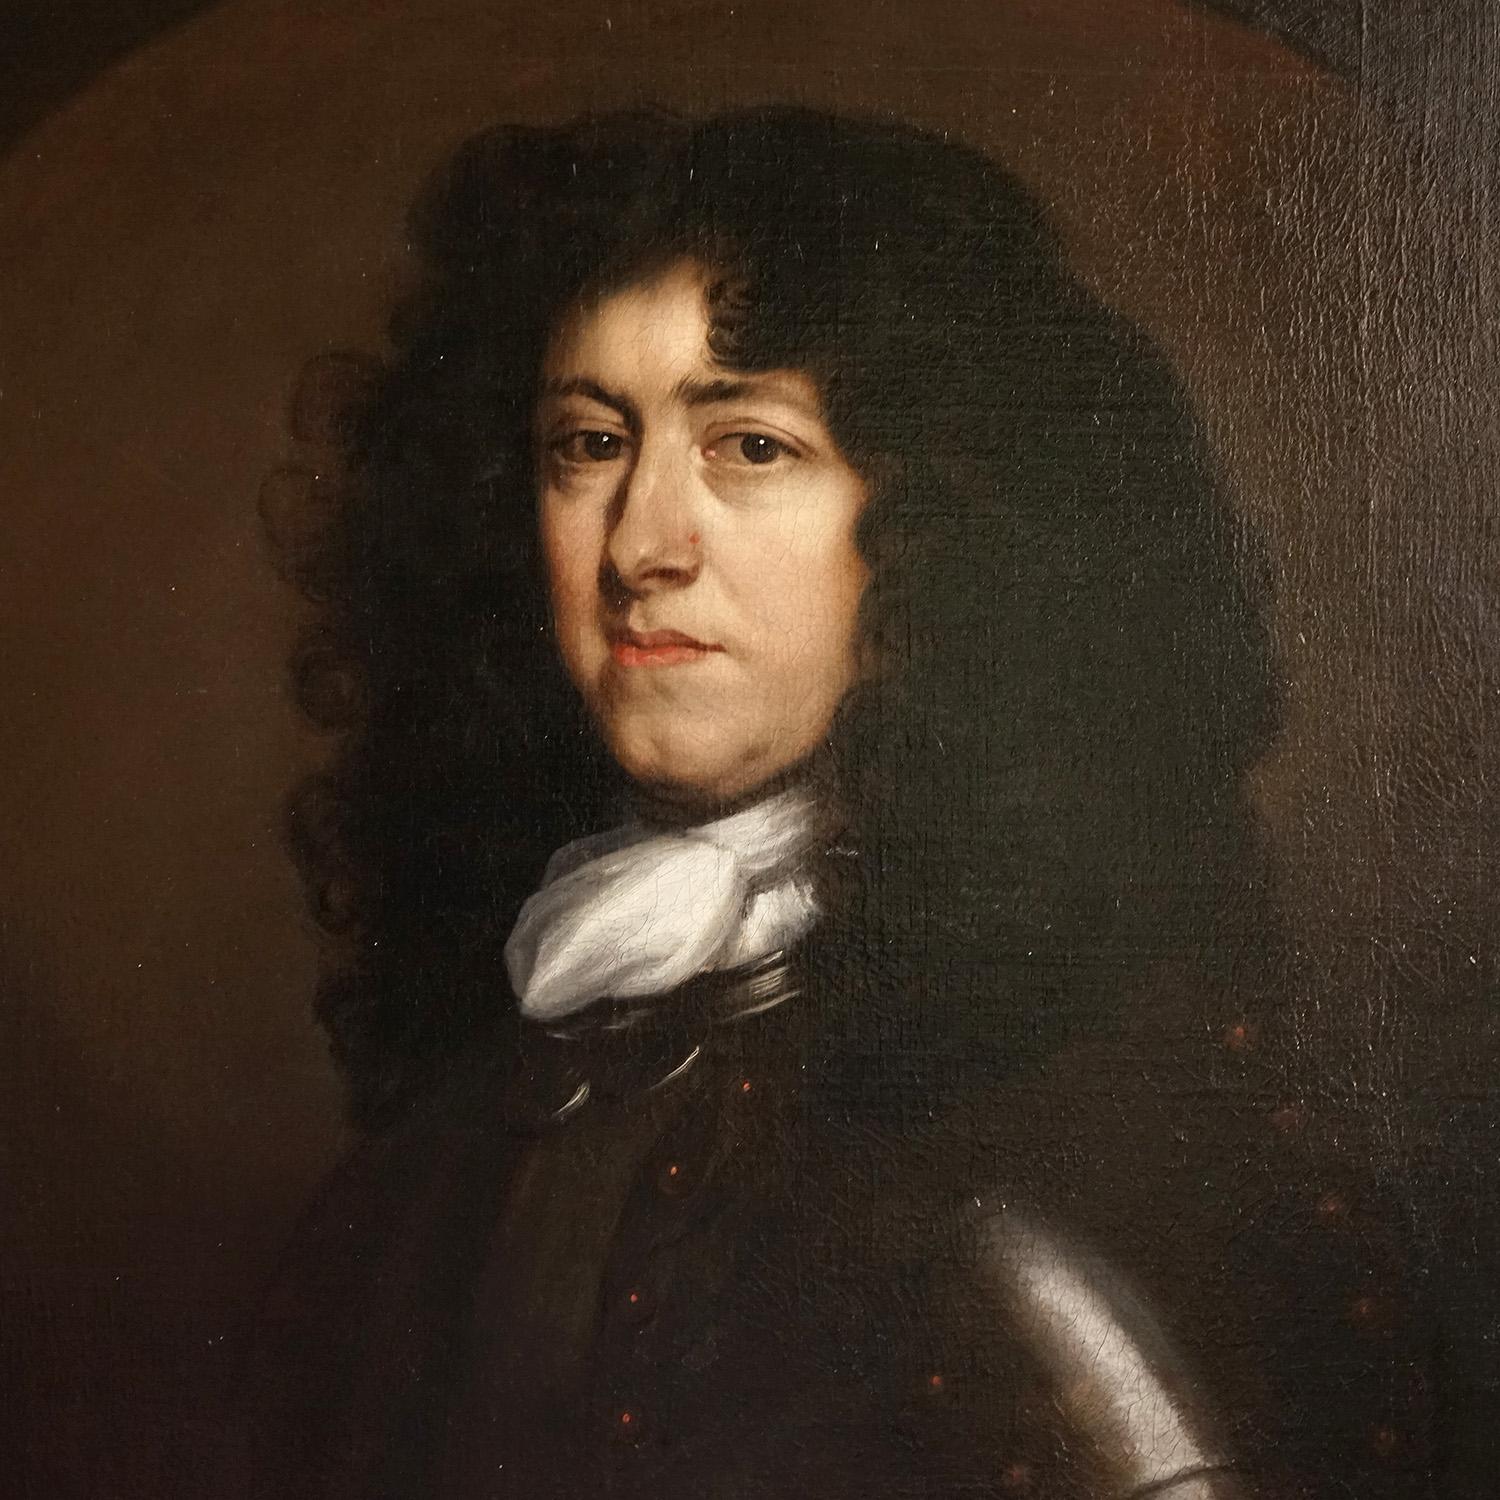 Antique Original Oil on Canvas Painting Depicting ‘John Hoby Esq. Son to Sir John Hoby Baronet’, Late 17th/Early 18th Century

by John Closterman (also known as Johan Baptist, Cloosterman, Cloysterman Klosterman; 1660–1711)

A spectacular portrait